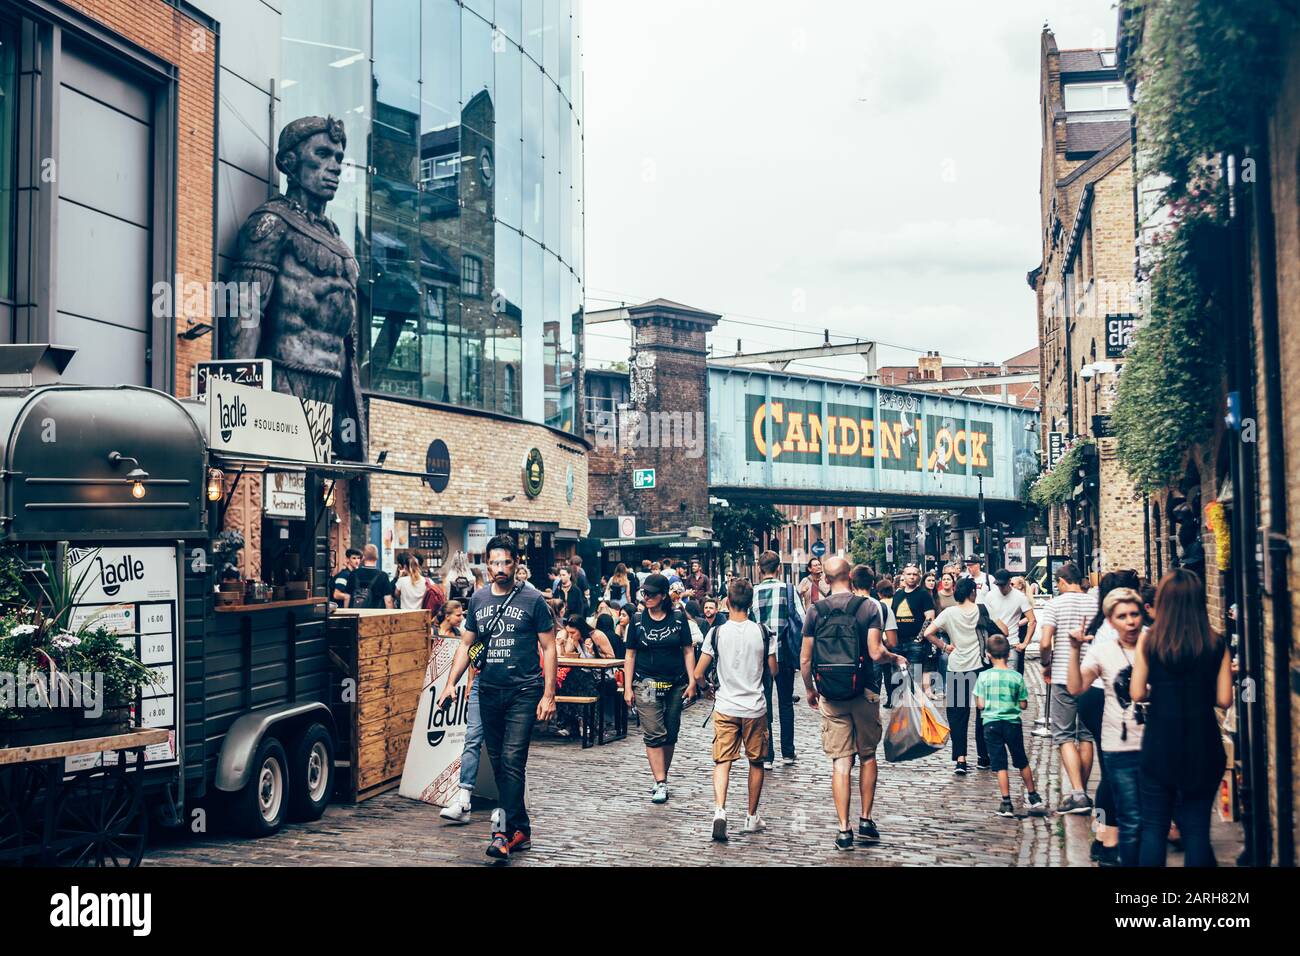 London/UK - July 17, 2019: People walking at Stables Market, located in the historic former Pickfords stables and horse hospital in Camden Town Stock Photo